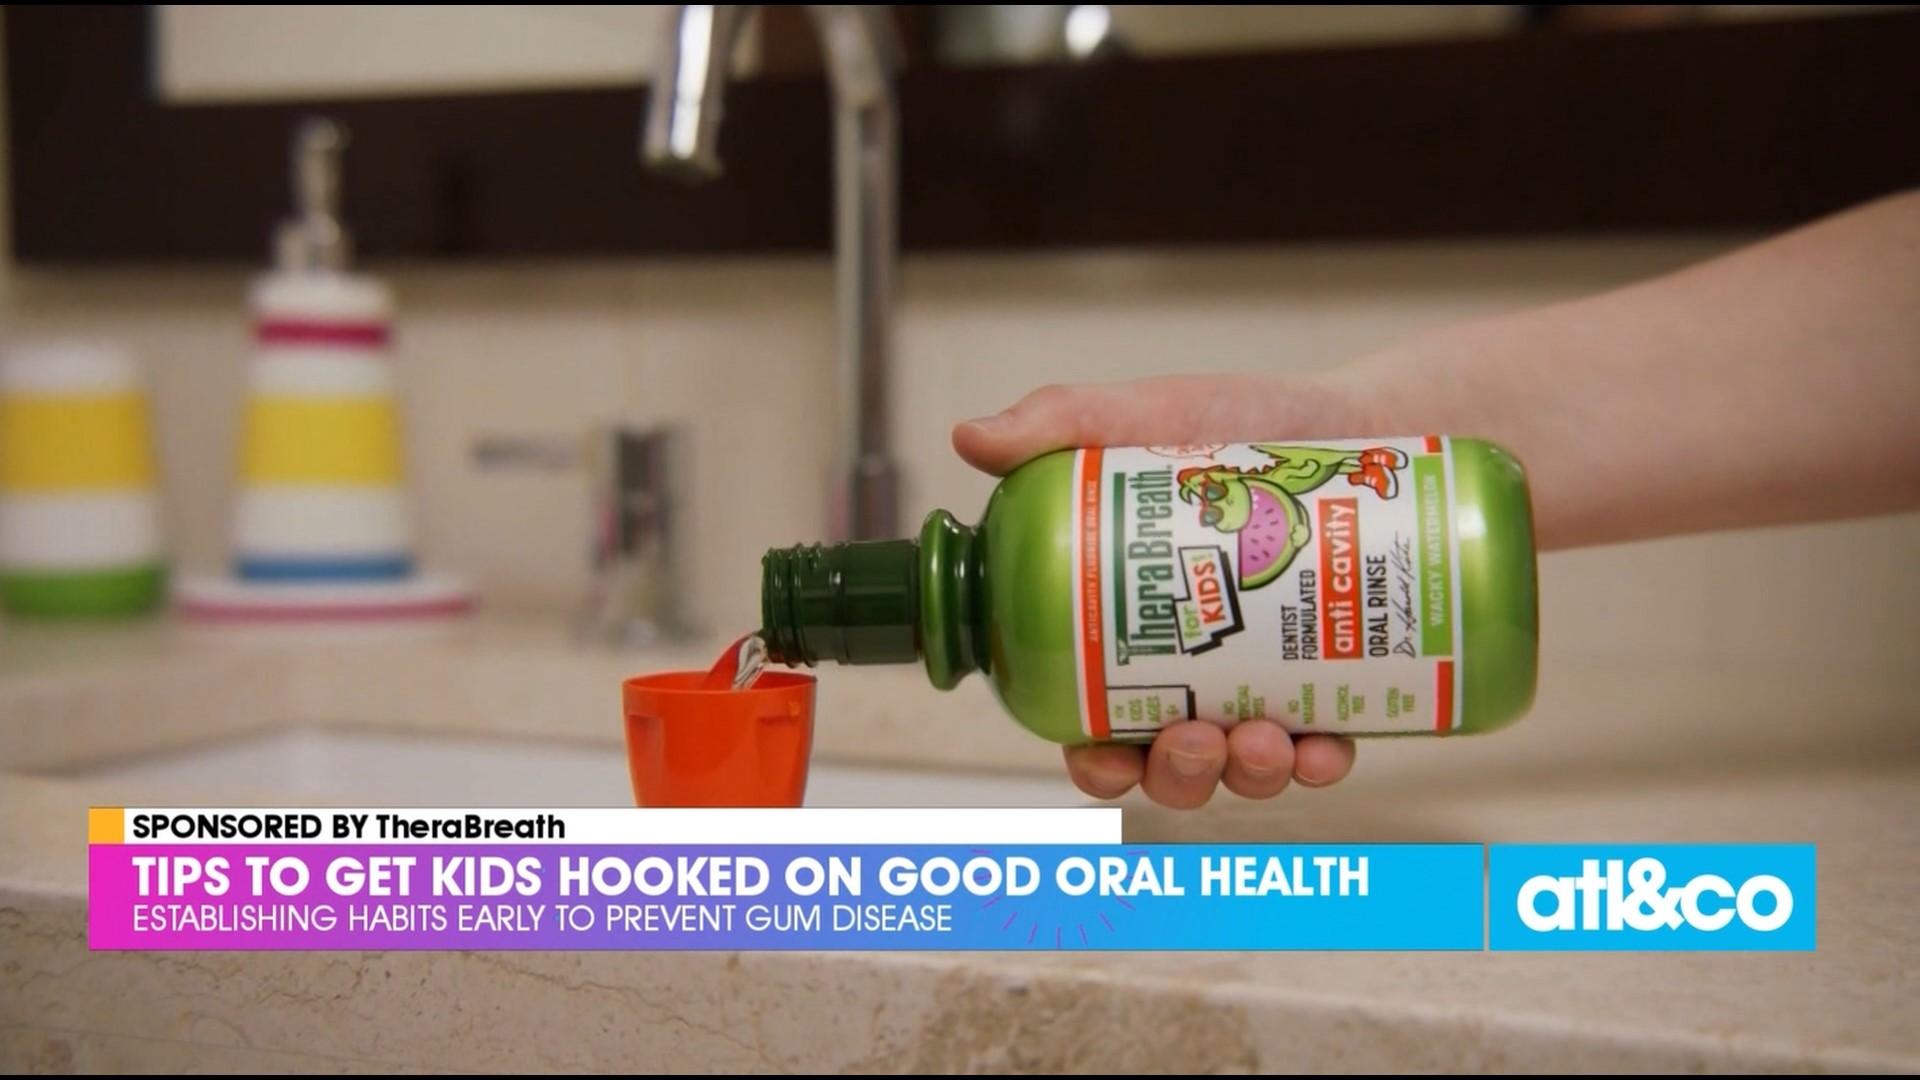 Get your kids hooked on good oral health and prevent gum disease with TheraBreath.